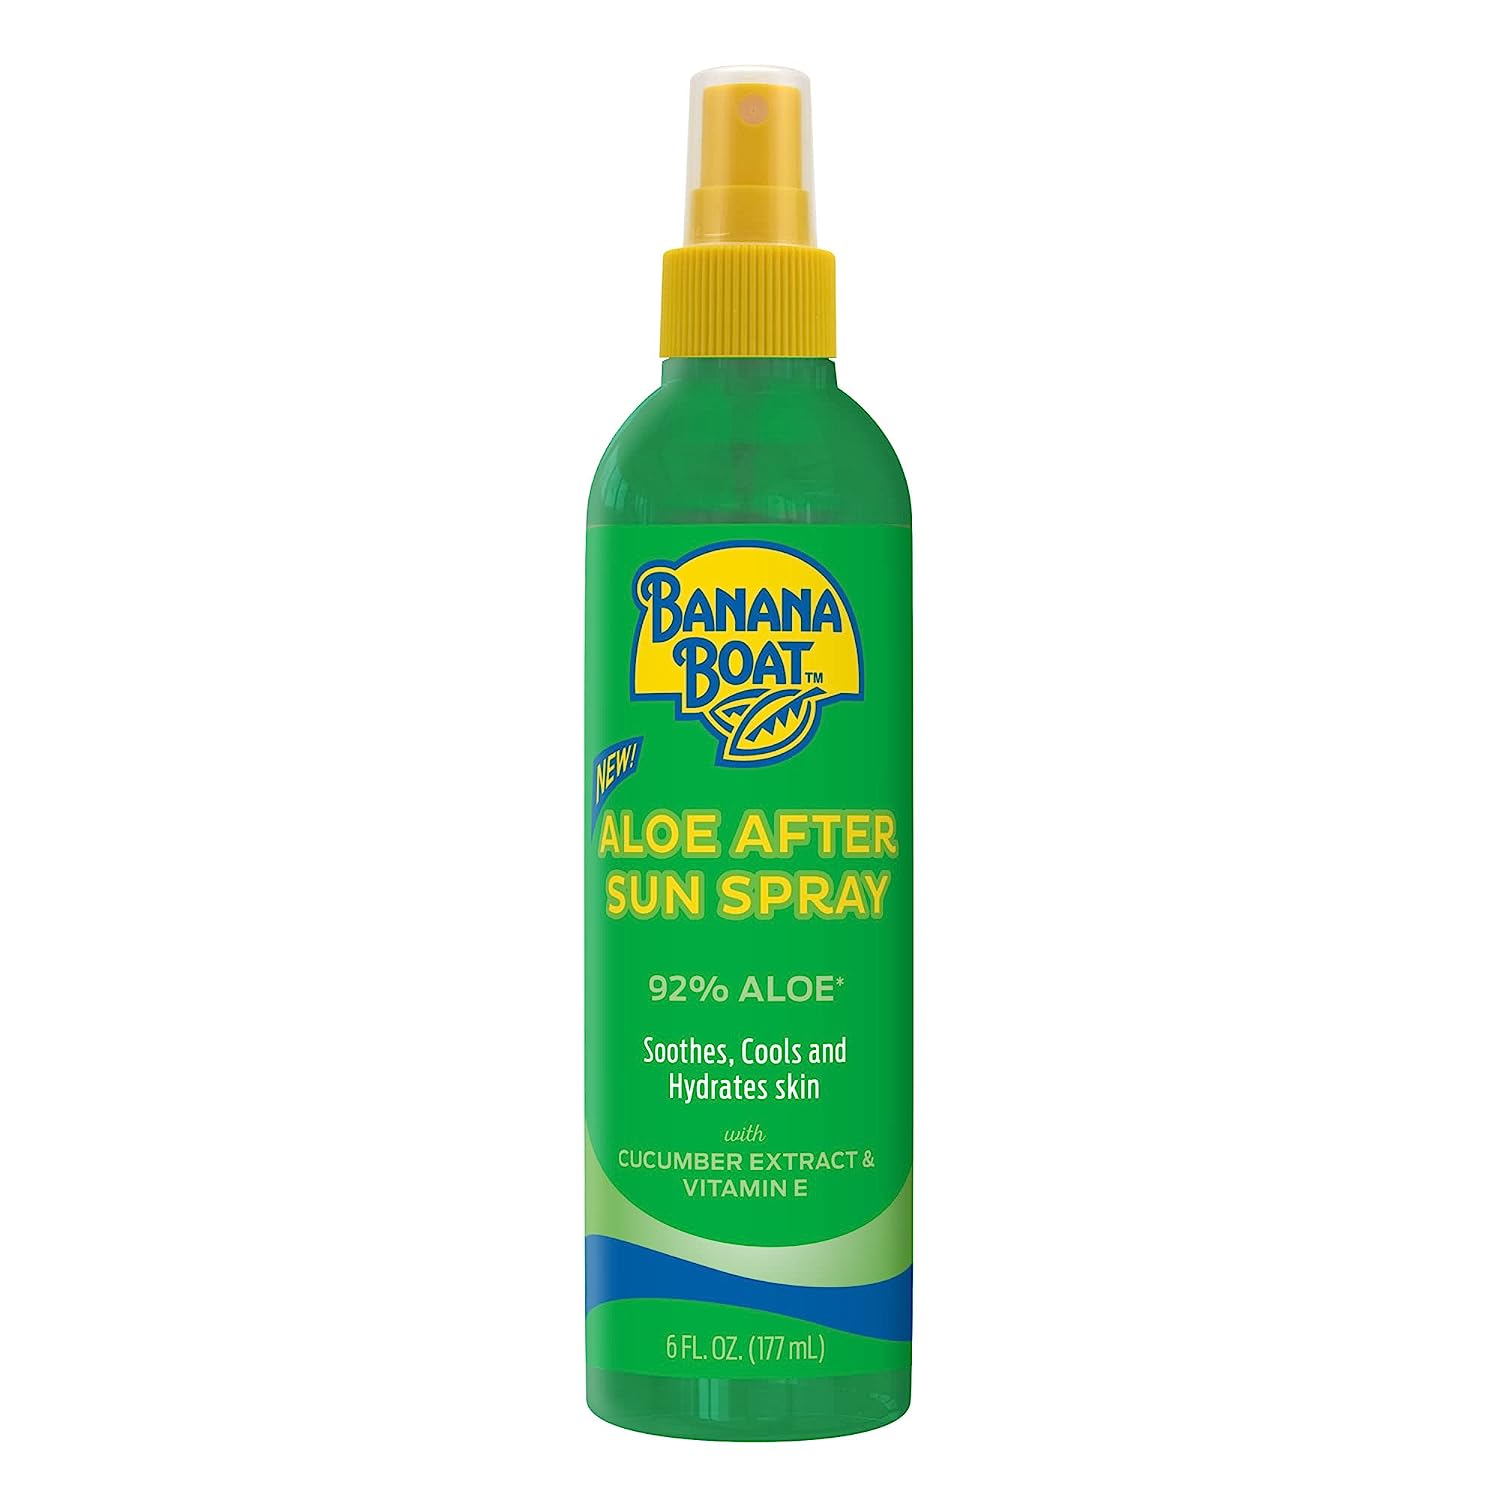 6-Oz Banana Boat Aloe After Sun Spray with Cucumber Extract & Vitamin E 2 for $6.60 ($3.29/ea) w/ S&S + Free S&H w/ Prime or $25+